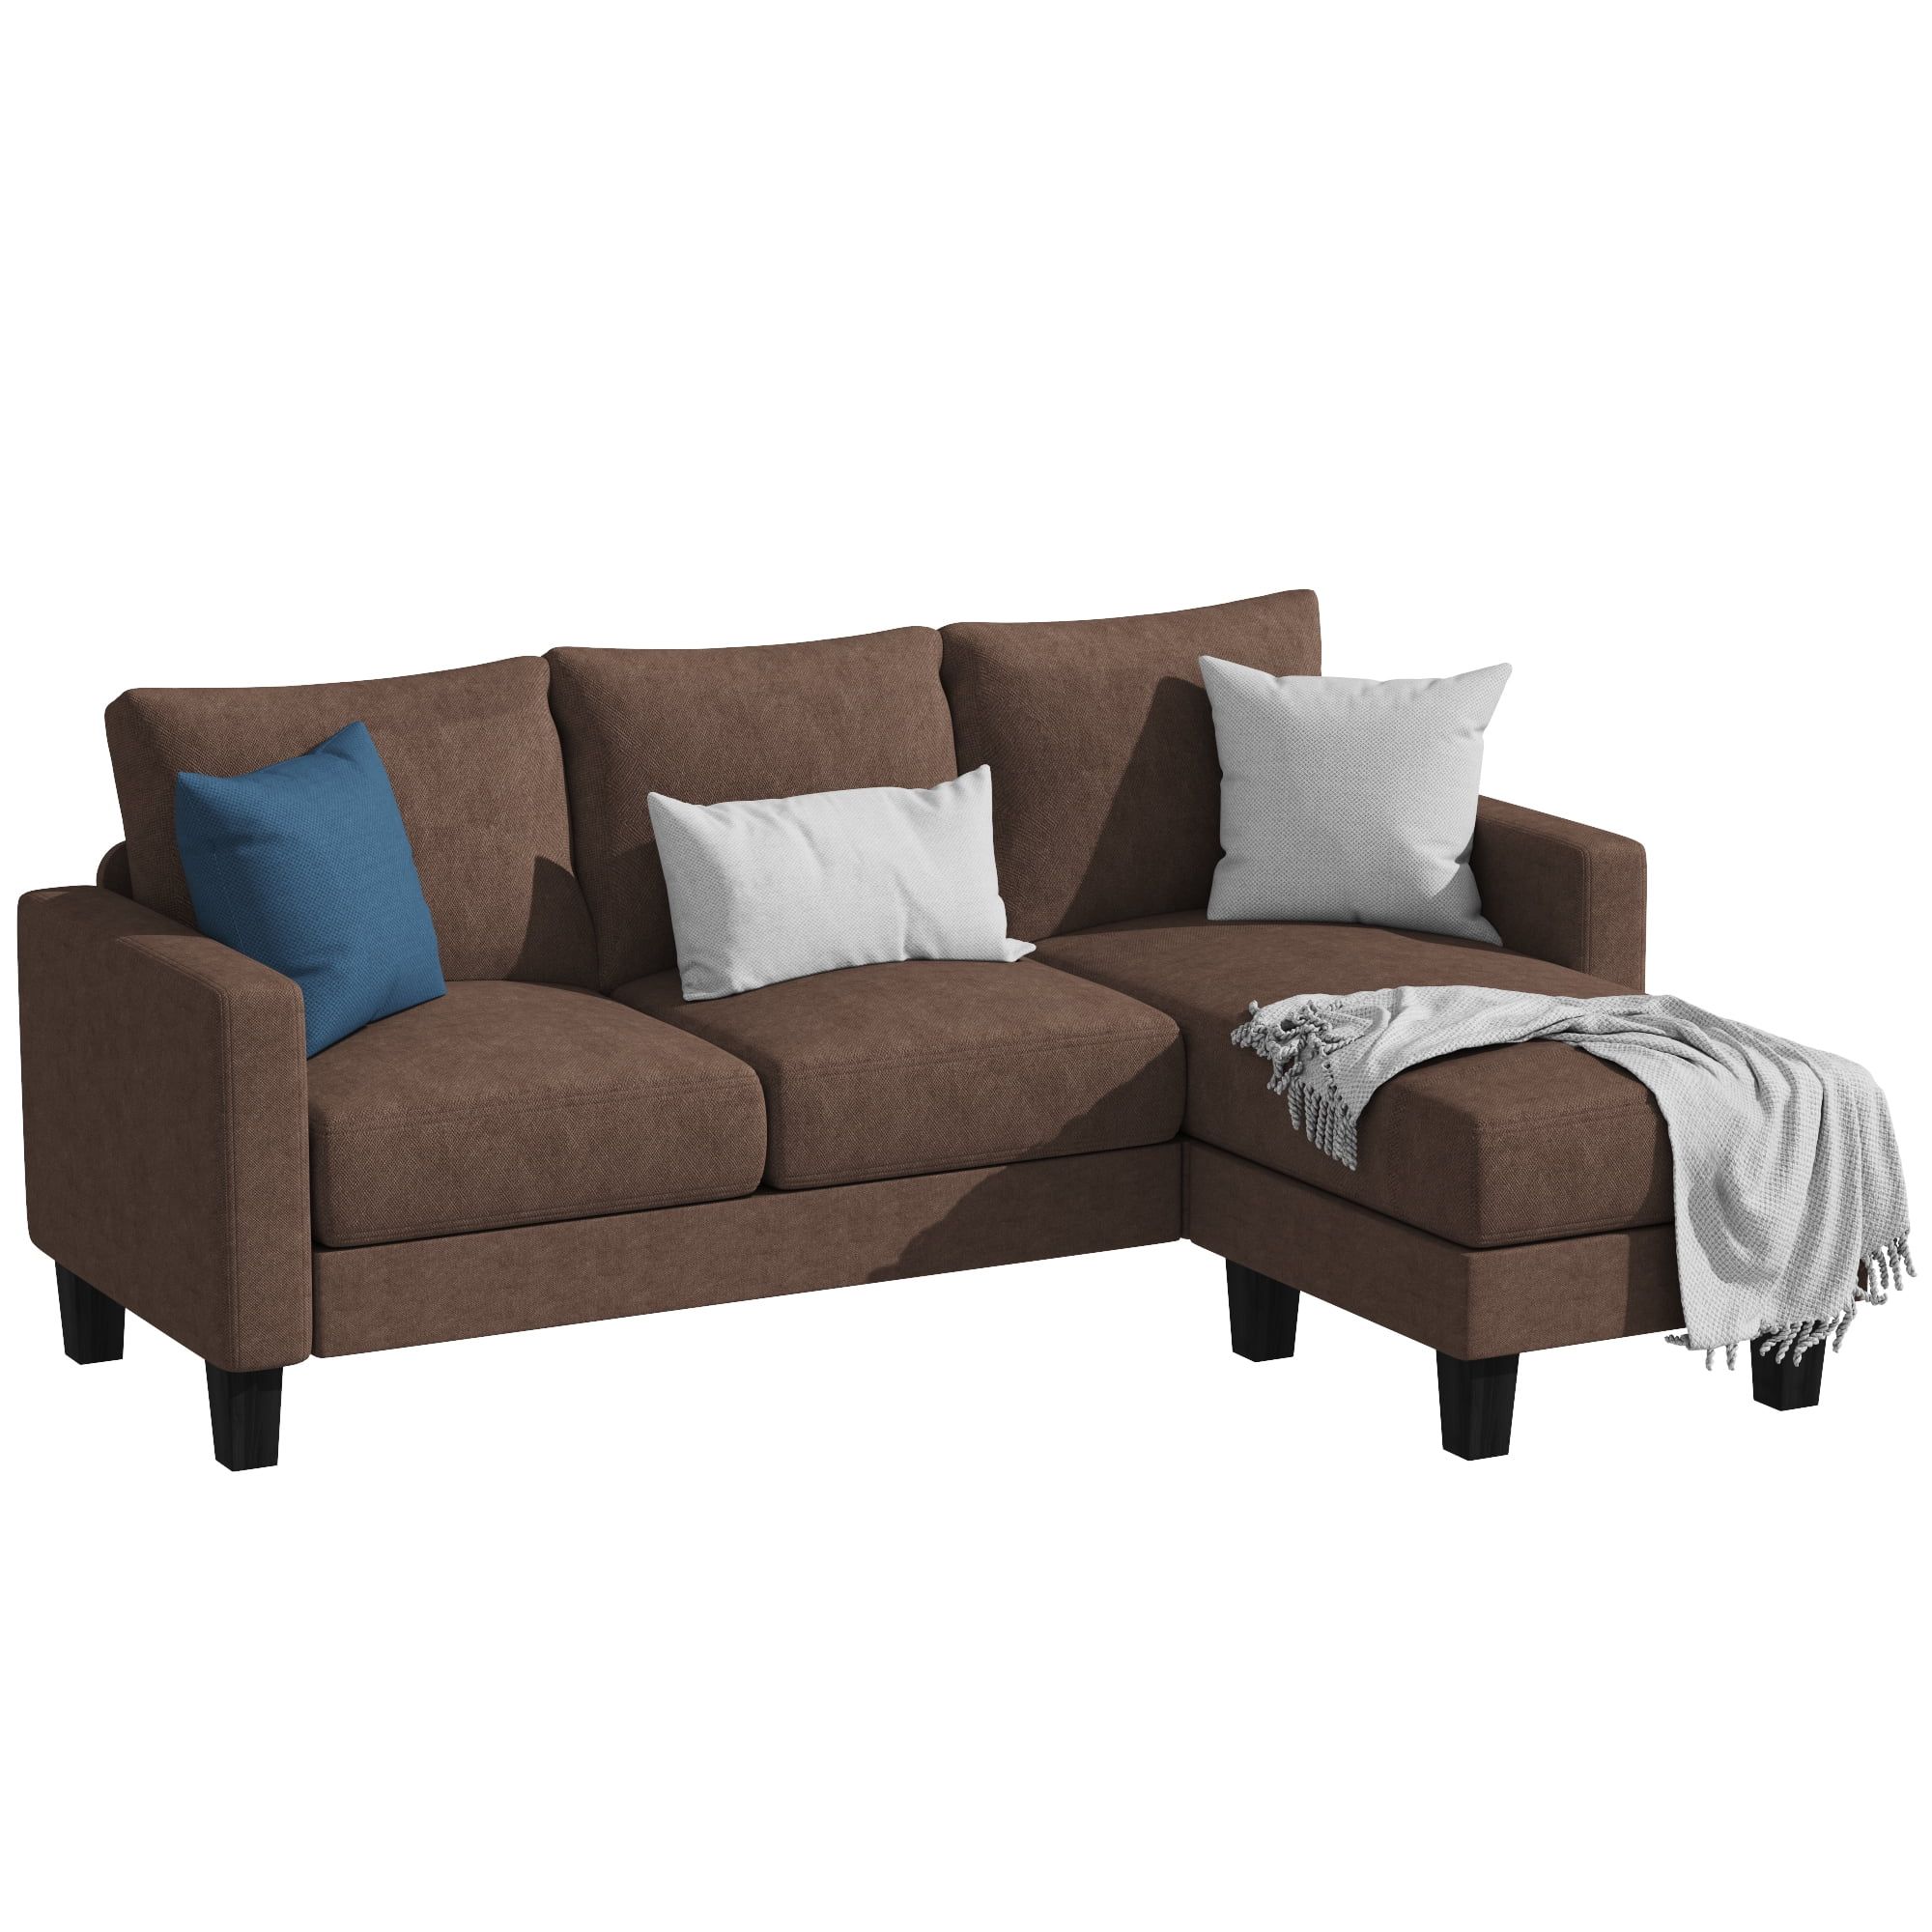 Buy Homall Convertible Sectional Sofa Couch, Modern Linen Fabric L Pertaining To 3 Seat Convertible Sectional Sofas (Gallery 9 of 20)